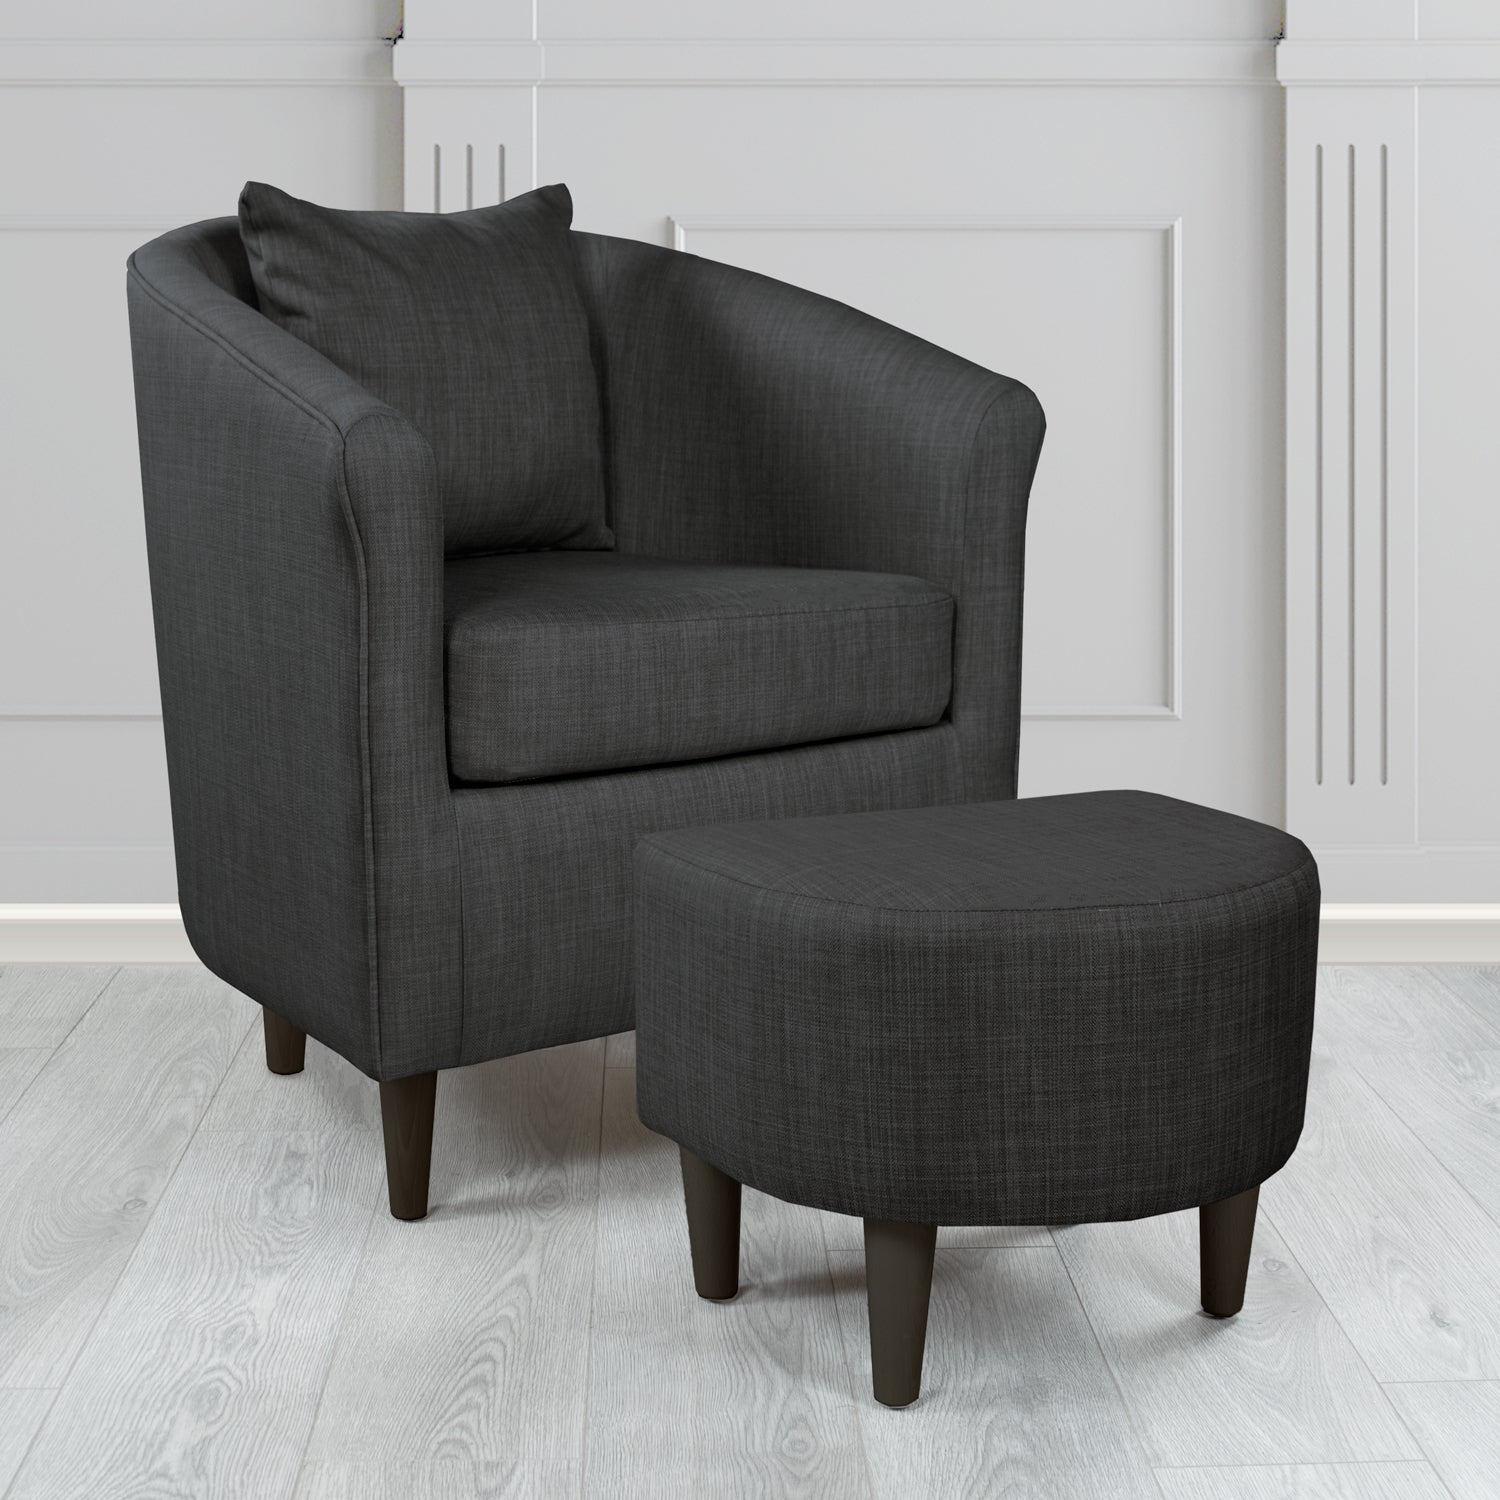 St Tropez Charles Ebony Plain Linen Fabric Tub Chair & Footstool Set with Scatter Cushion - The Tub Chair Shop